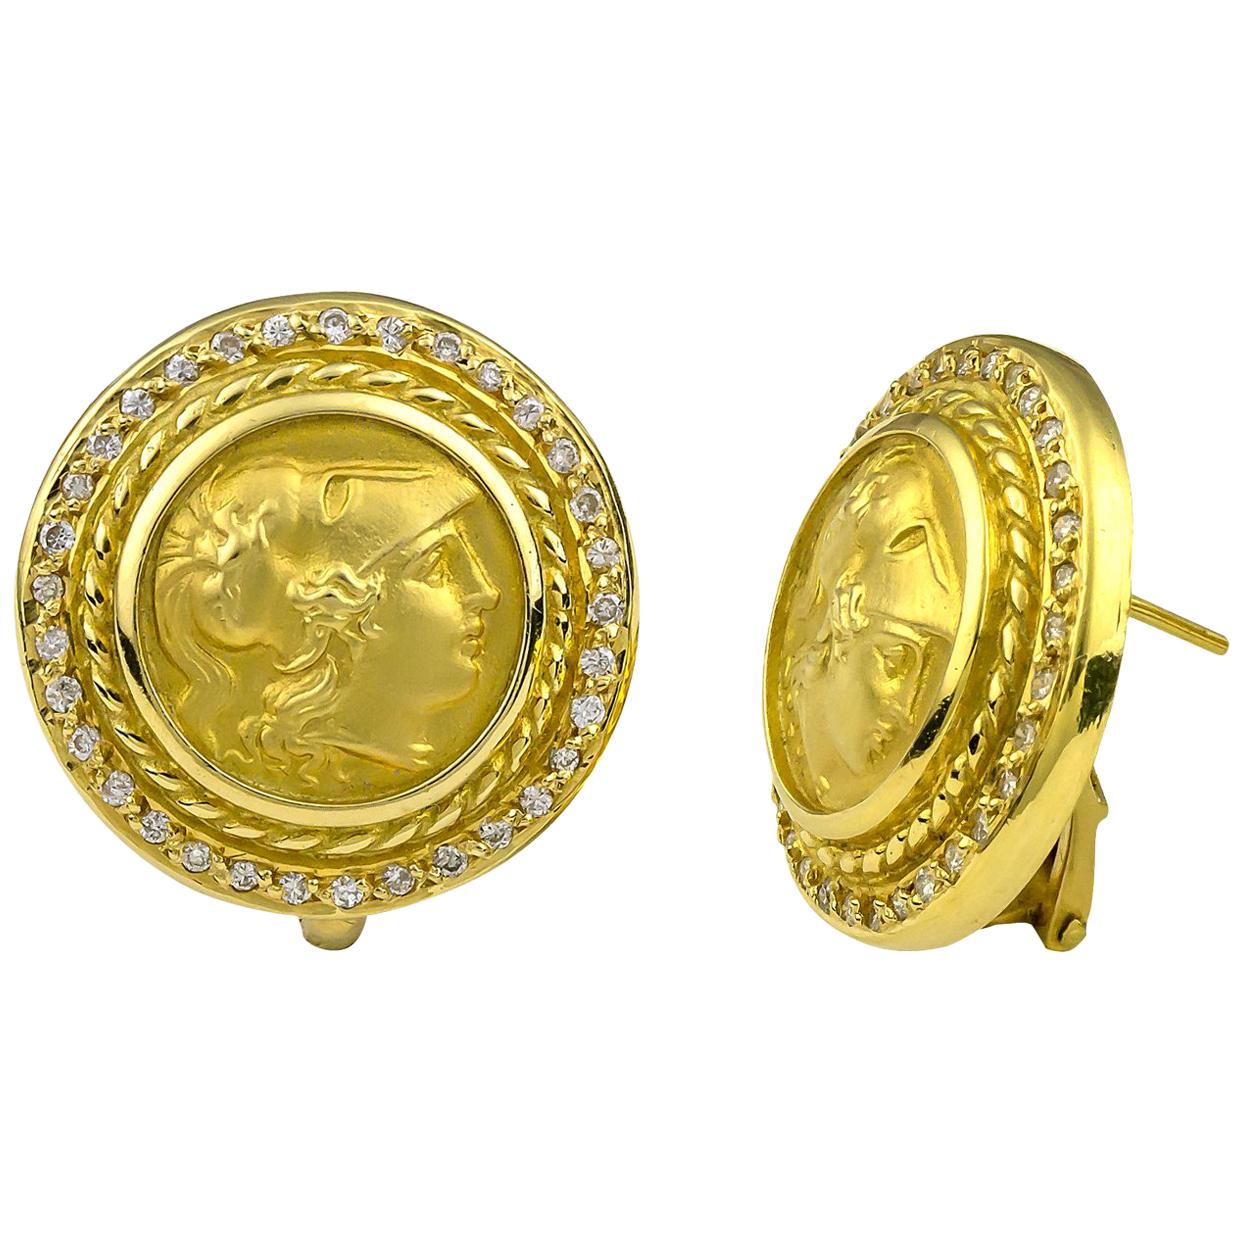 Georgios Collections 18 Karat Yellow Gold Diamond Coin Stud Earrings of Athina